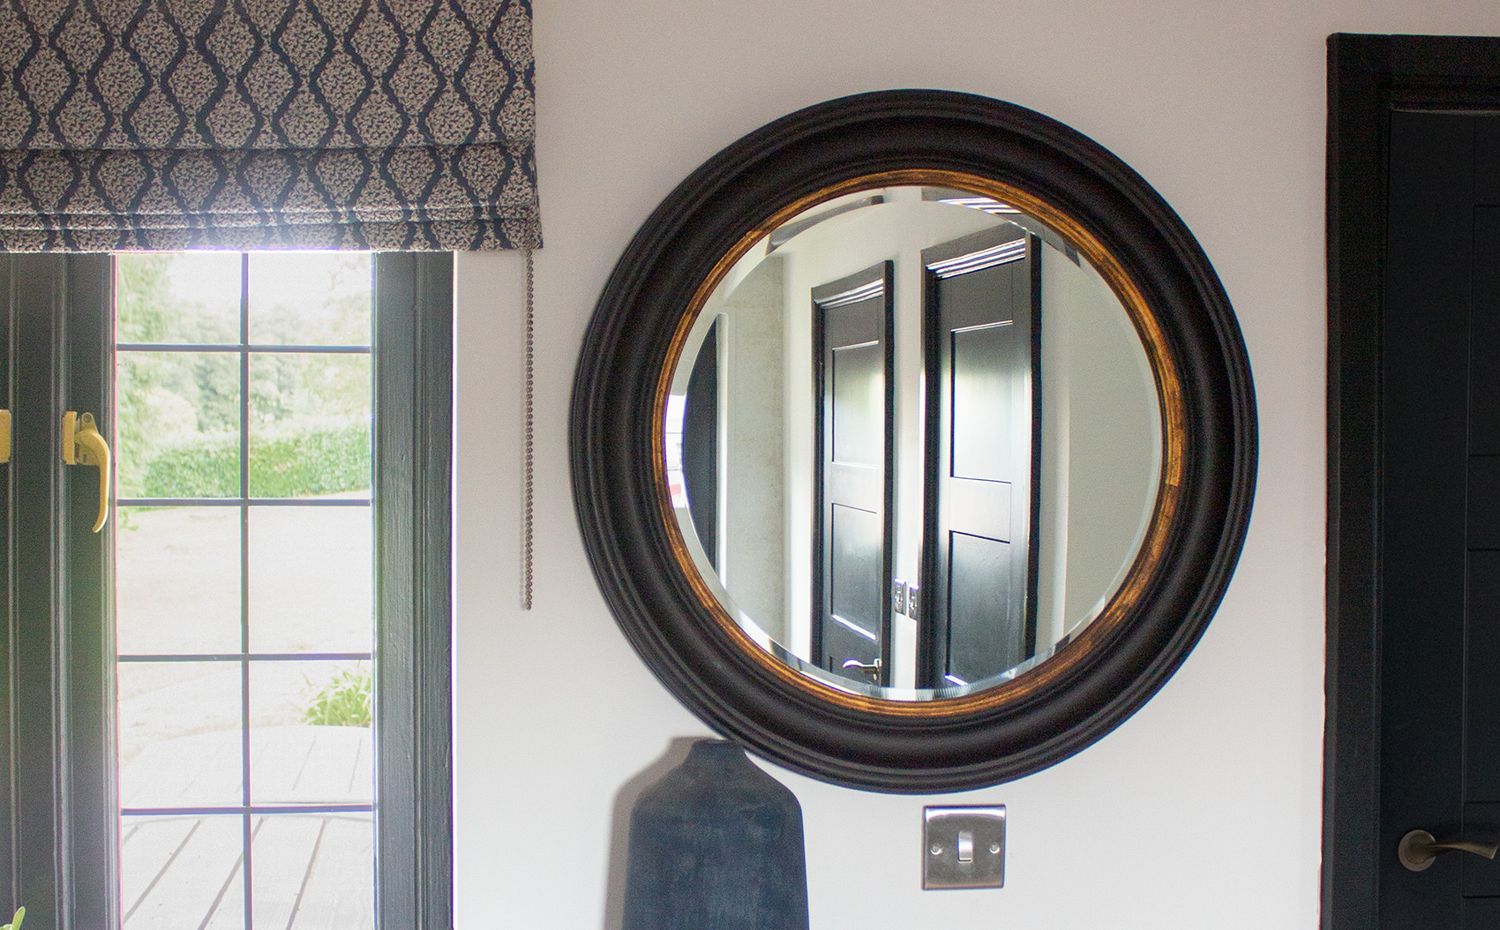 A close up of the black round mirror, with a reflection of the black doors in the hallway.